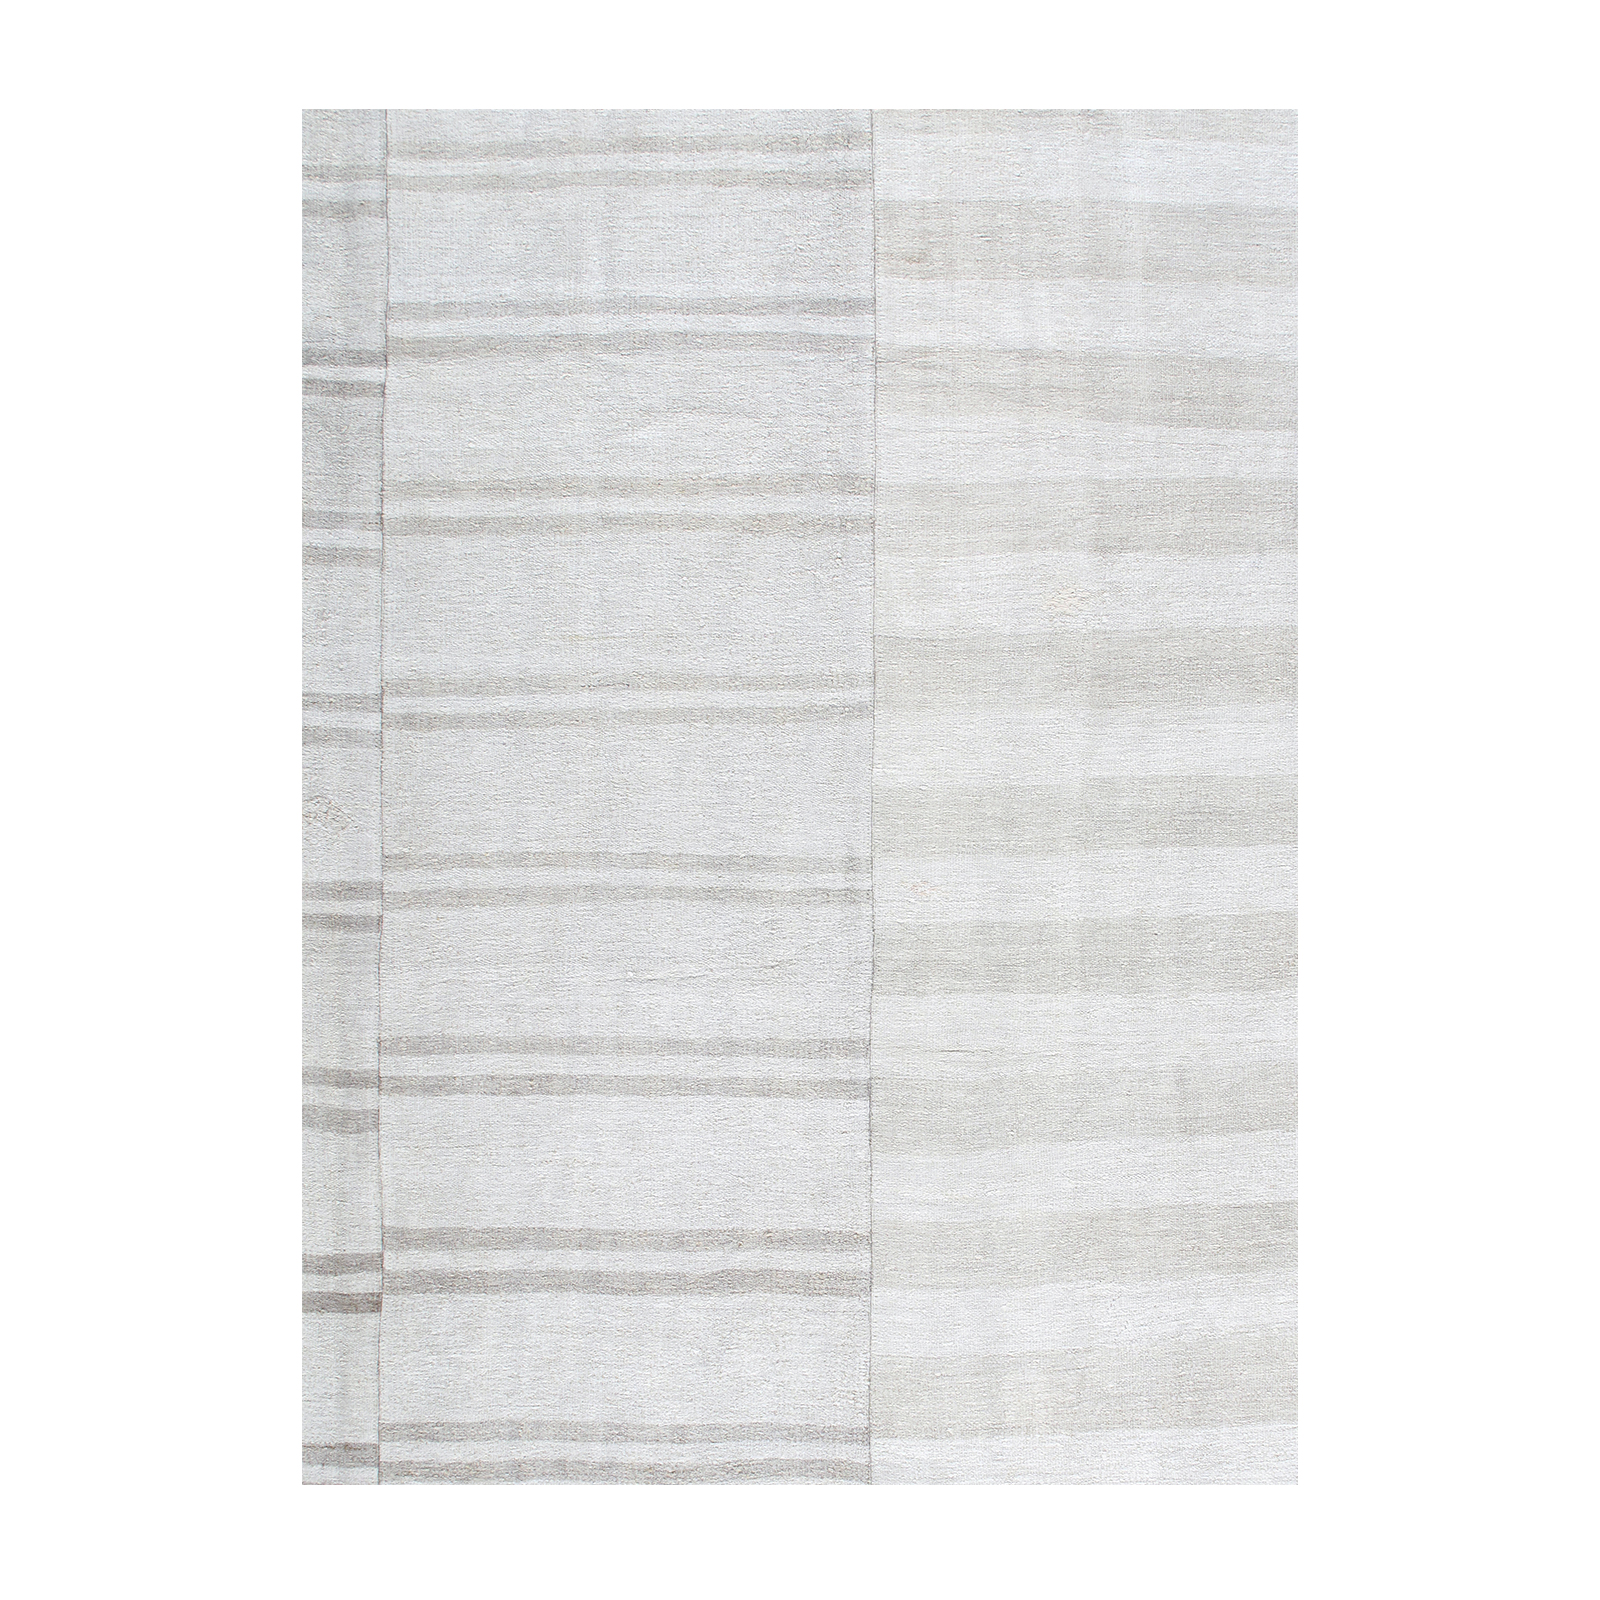 This Vintage Flatweave rug embody the minimalist sophistication that emerged in the mid-20th century which continues to thrive today. 